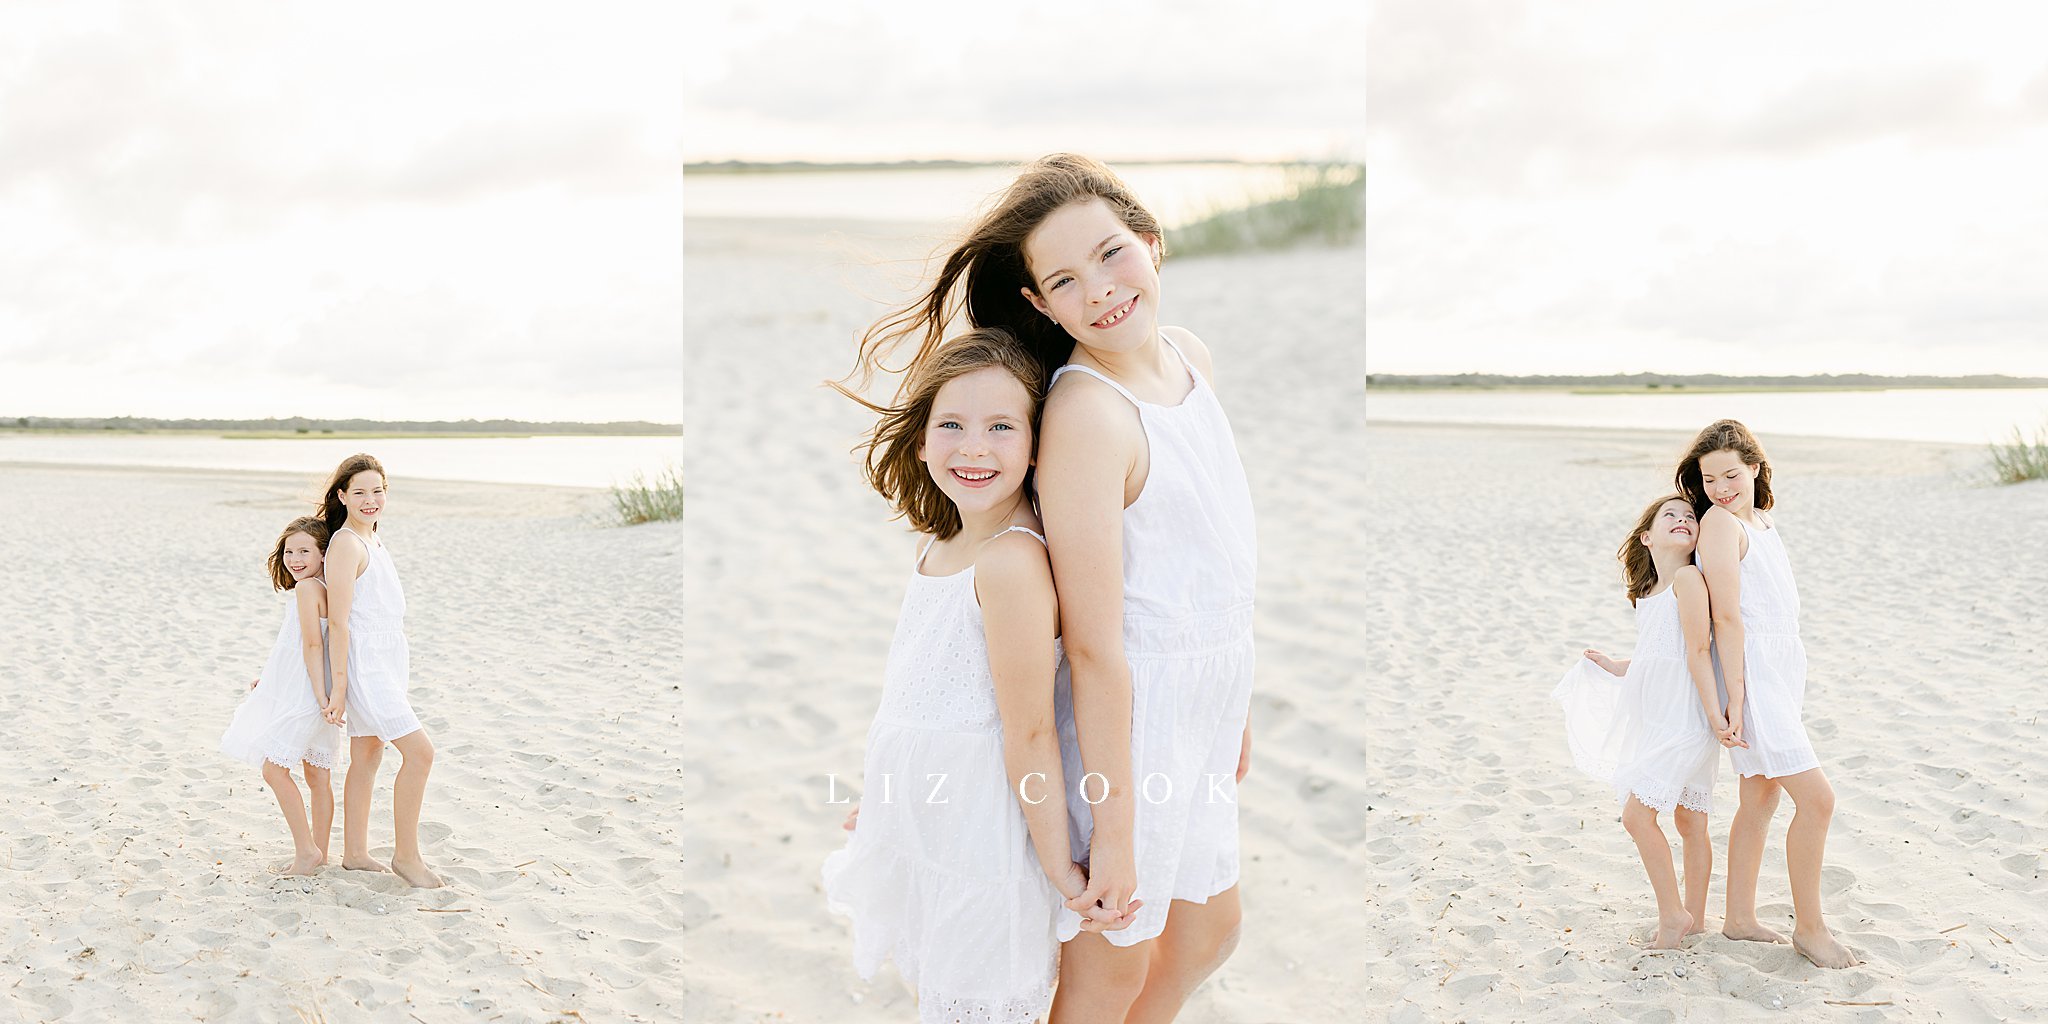 maternity-pictures-on-beach-liz-cook-photography-caroline-jean-photography_0006.jpg